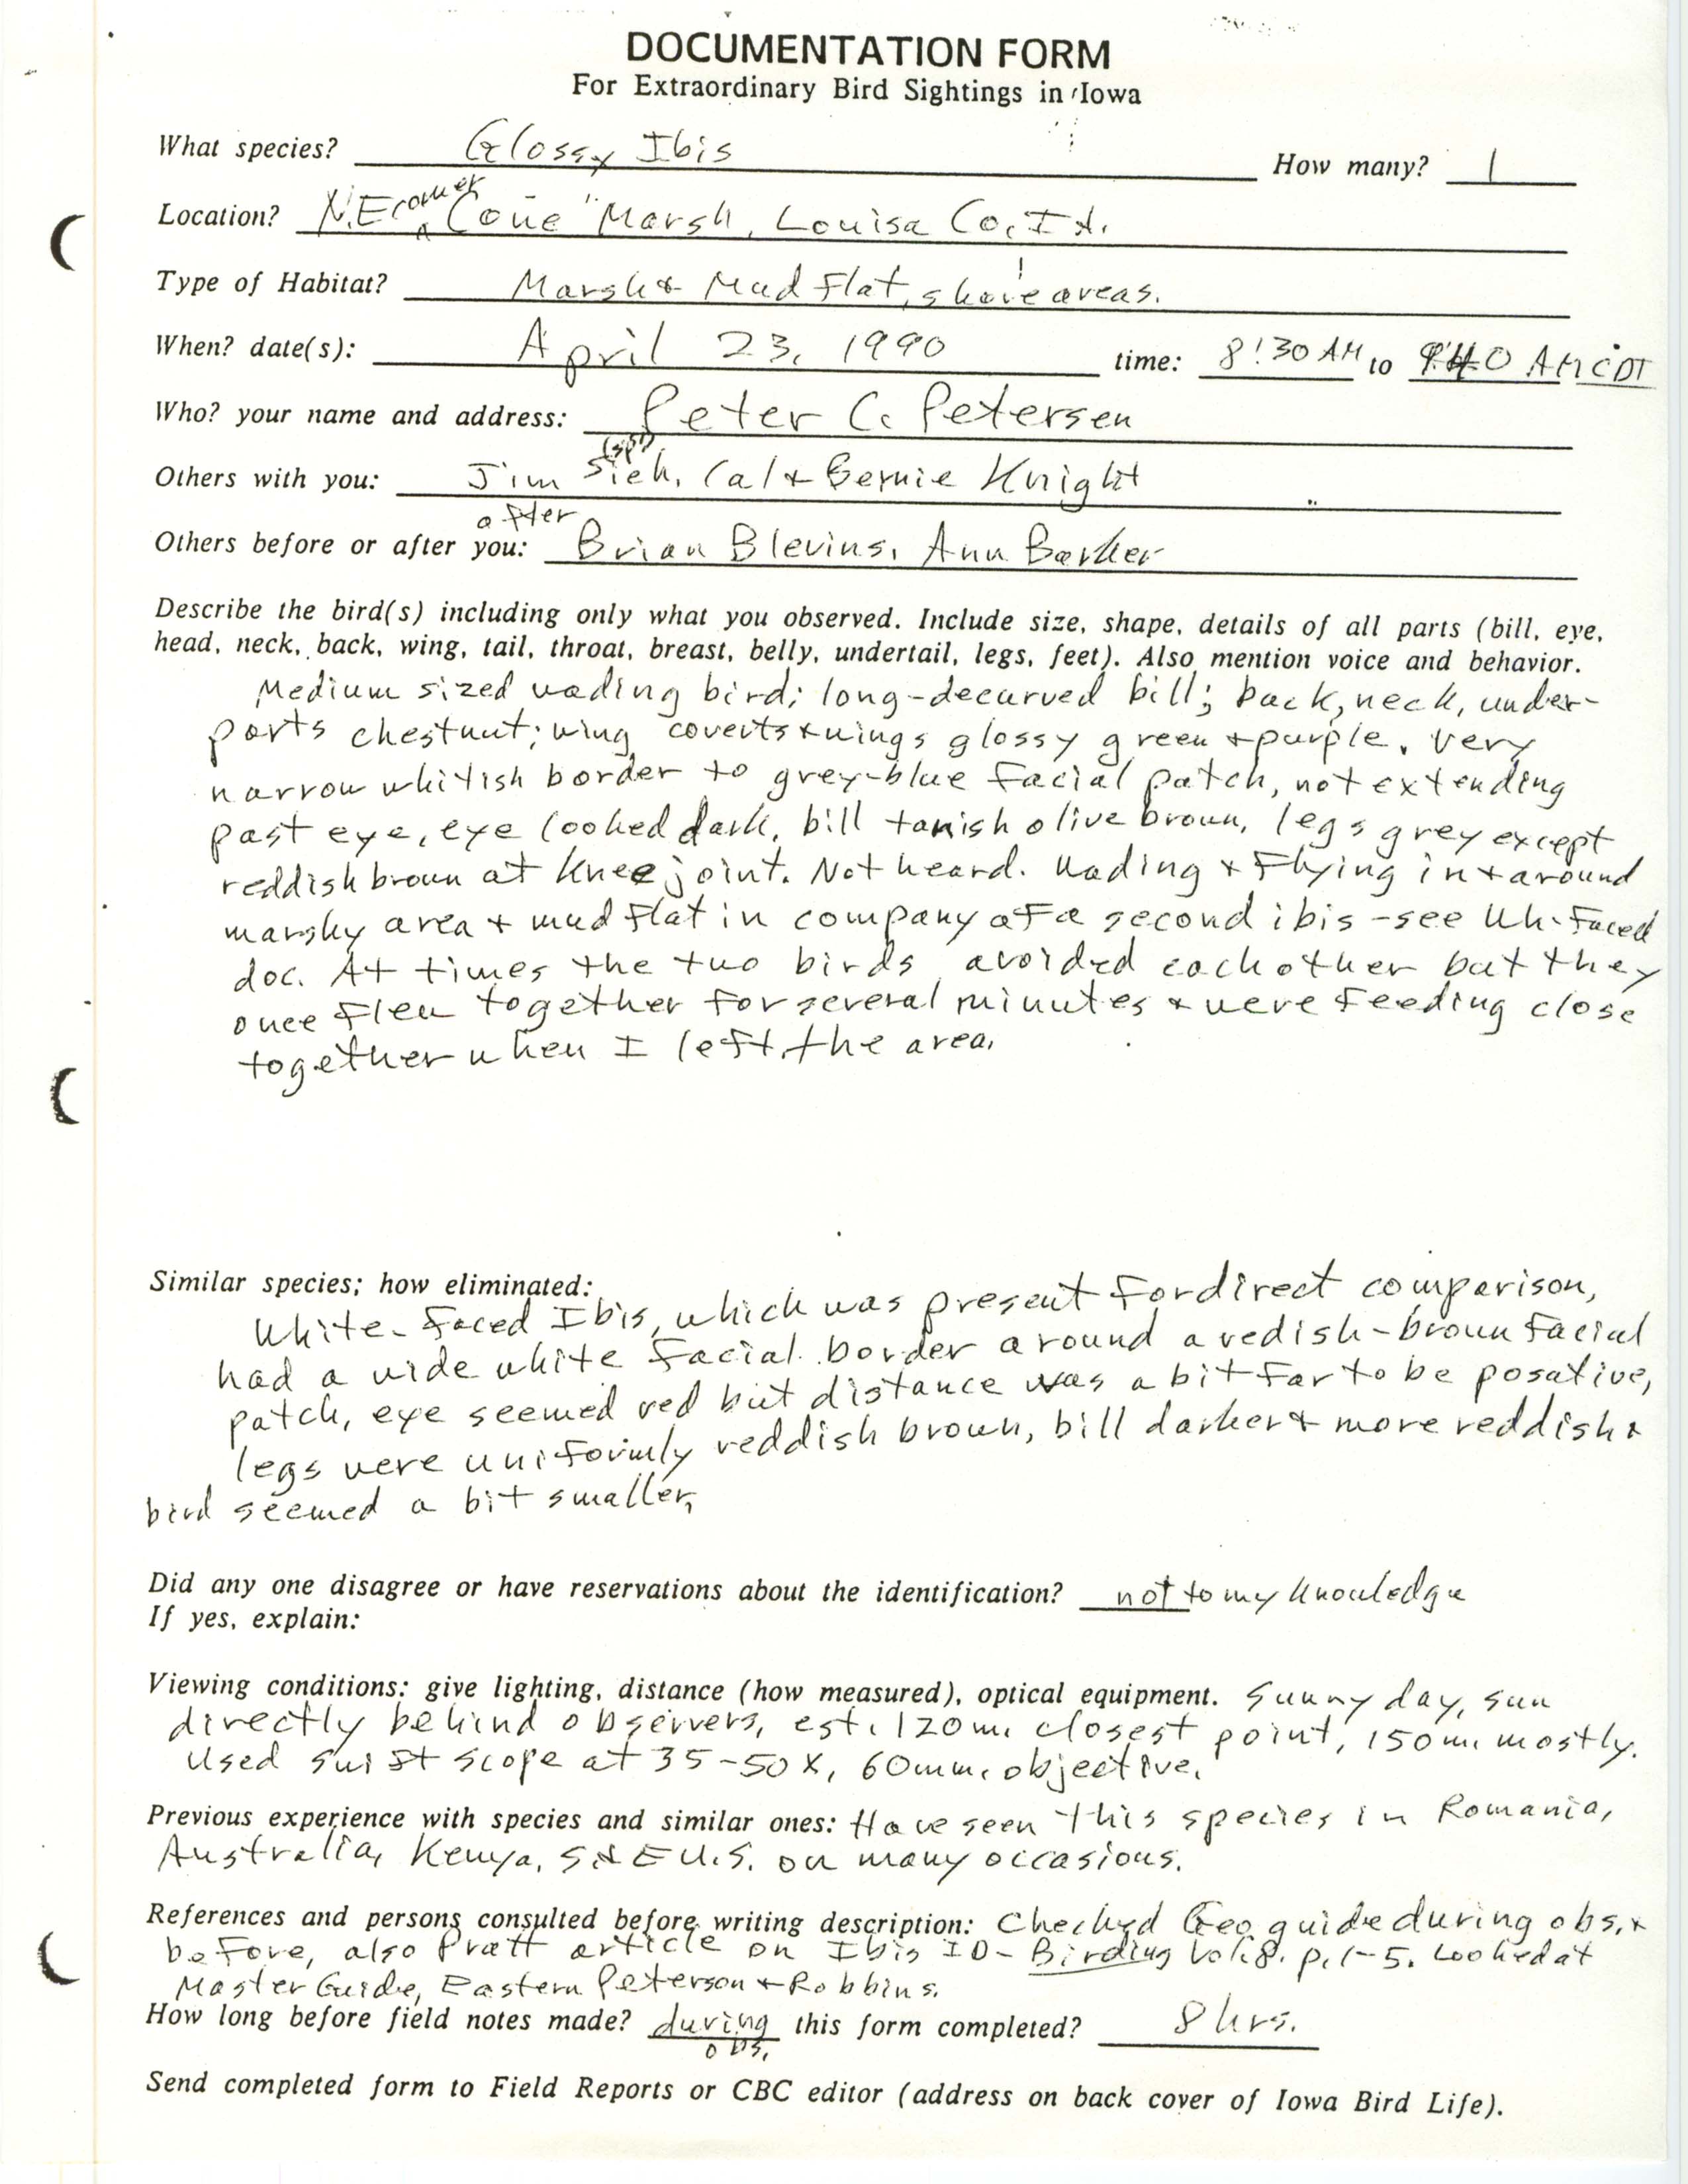 Rare bird documentation form for Glossy Ibis at Cone Marsh, 1990